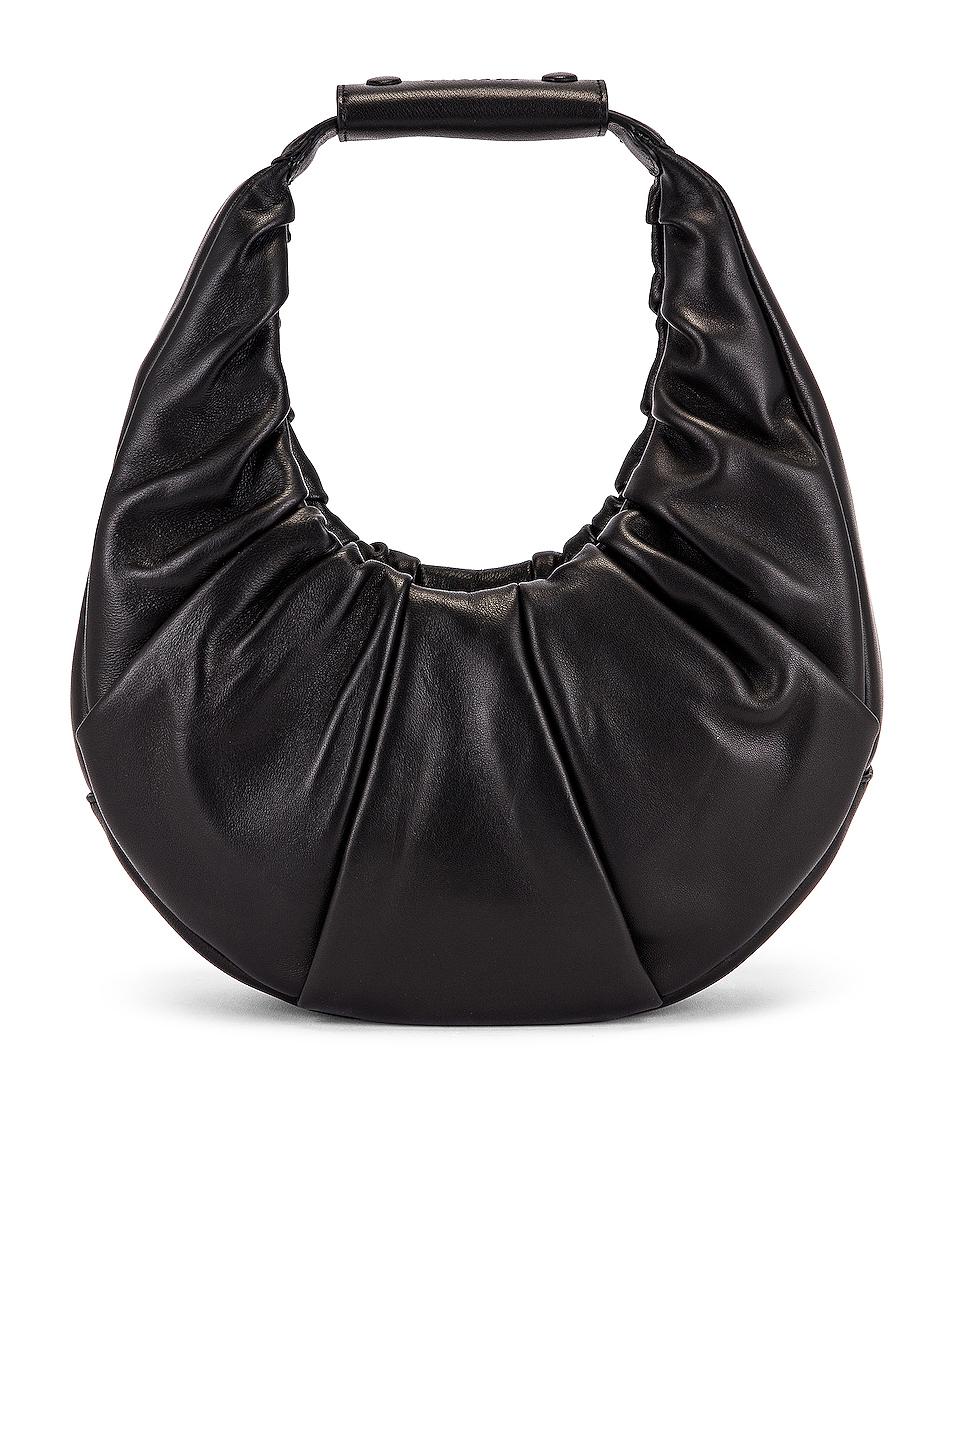 STAUD Leather Soft Moon Bag in Black - Lyst